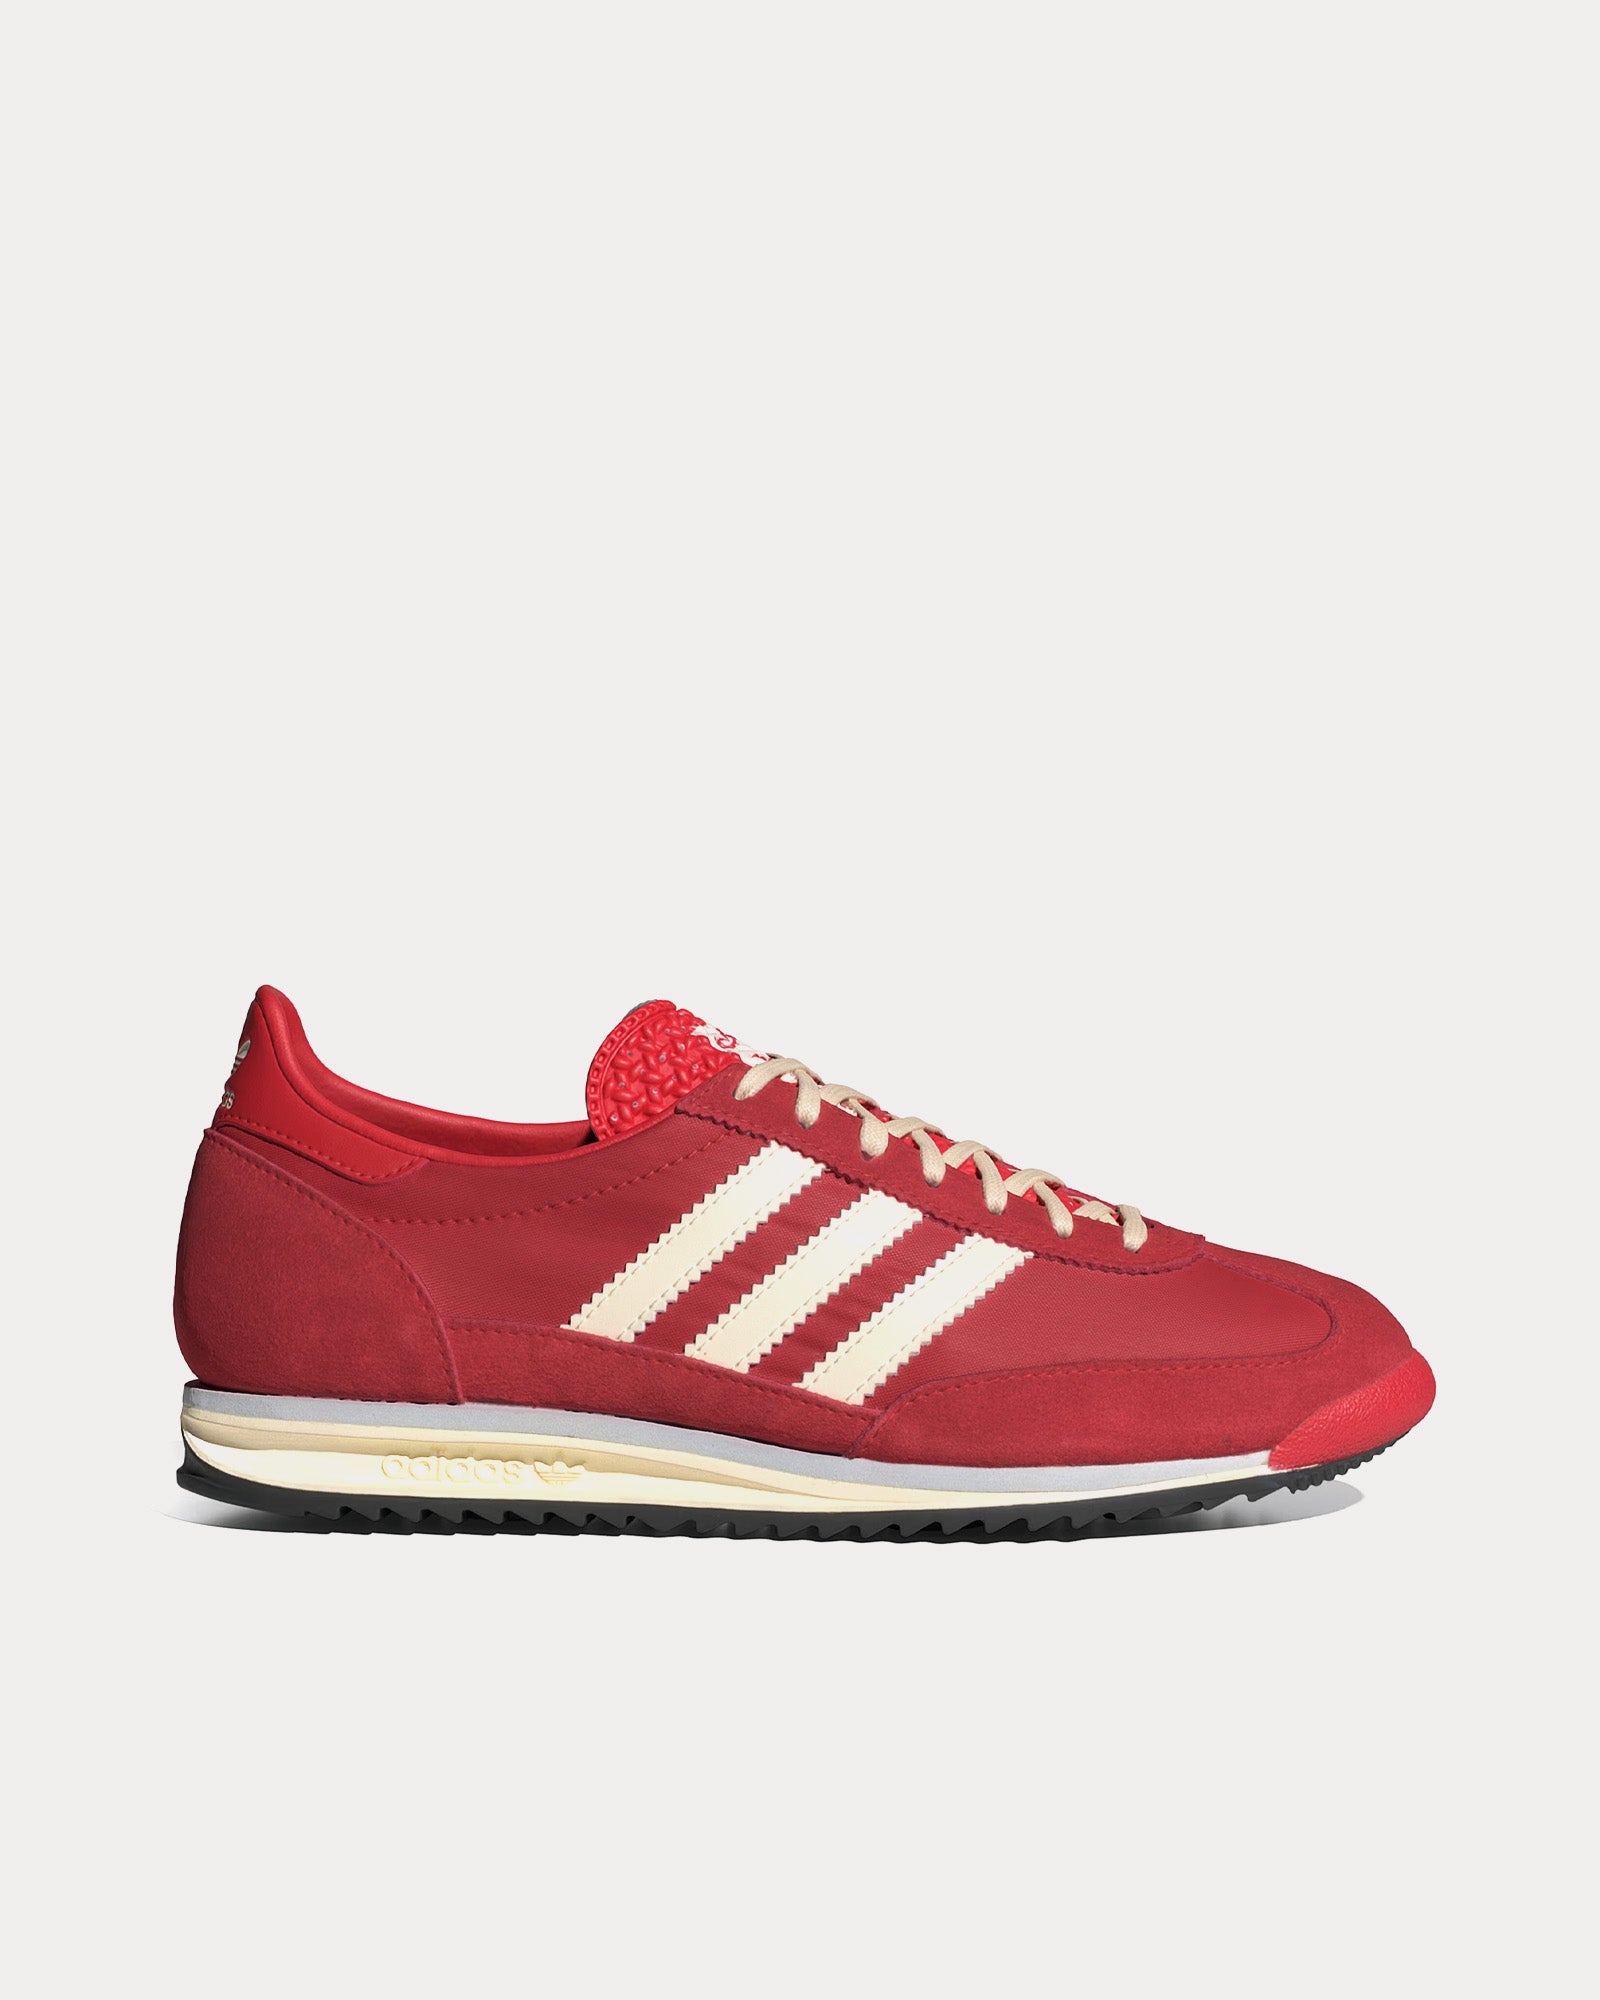 Adidas - SL 72 Better Scarlet / Cream White / Halo Blue Low Top Sneakers